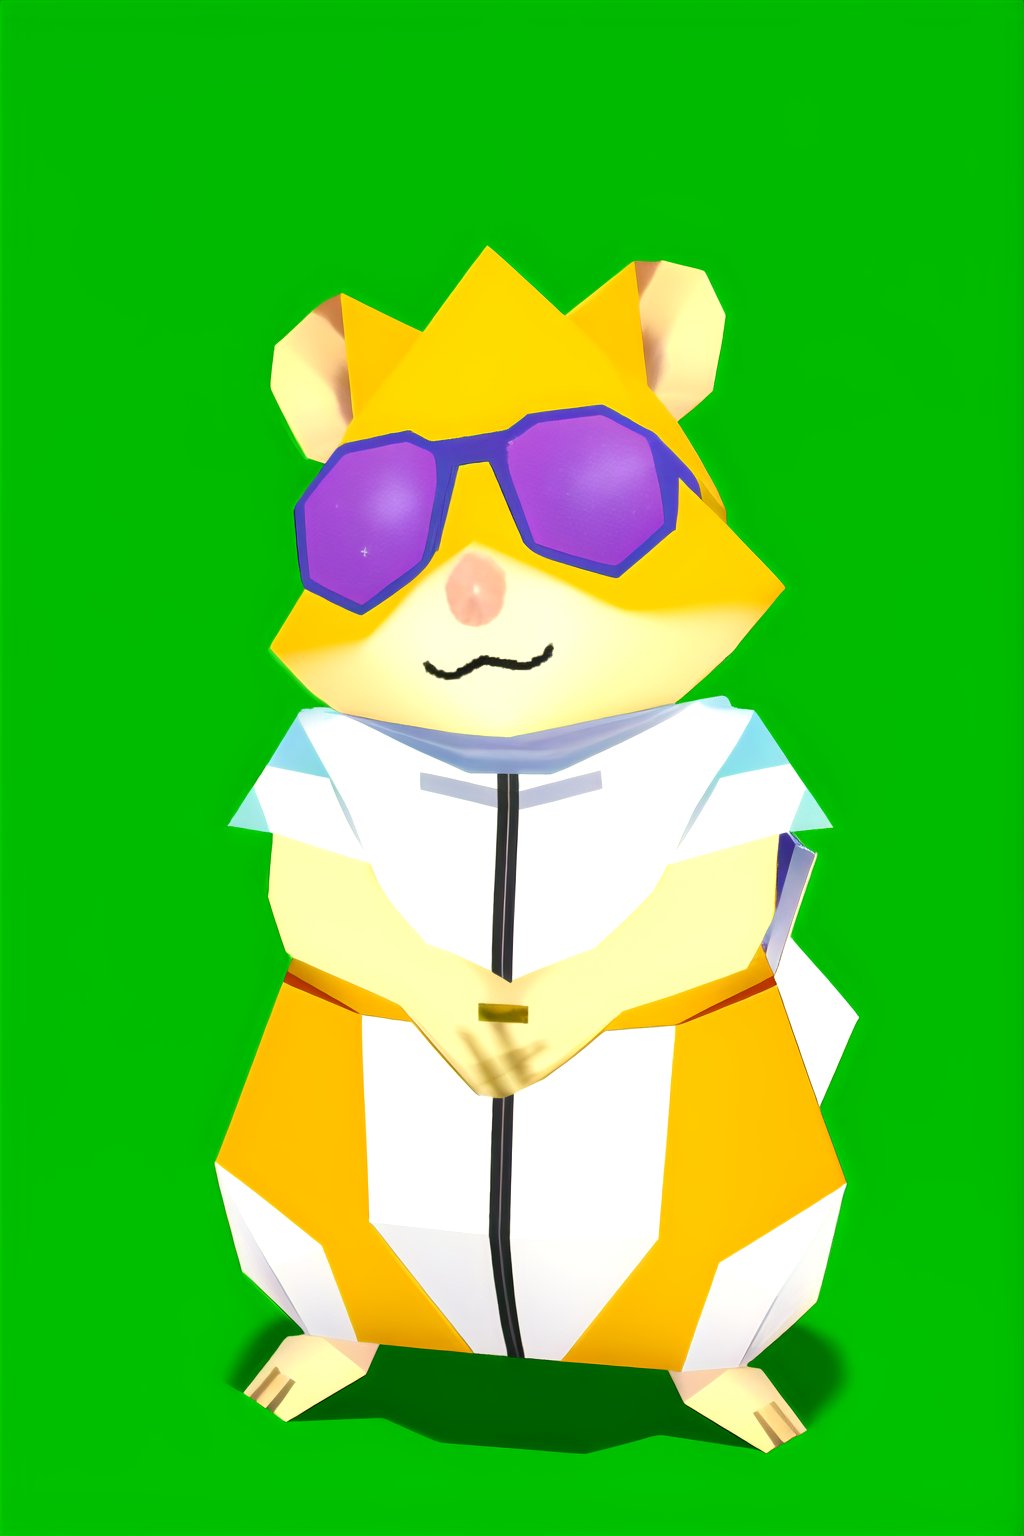  3d, (n64style:1.3), ocarinaoftime, screenshot of a nintendo 64 game, n64, a standing hamster wearing galaxy sunglasses on a green background, | polygonal graphics, game cg, | faded,n64style